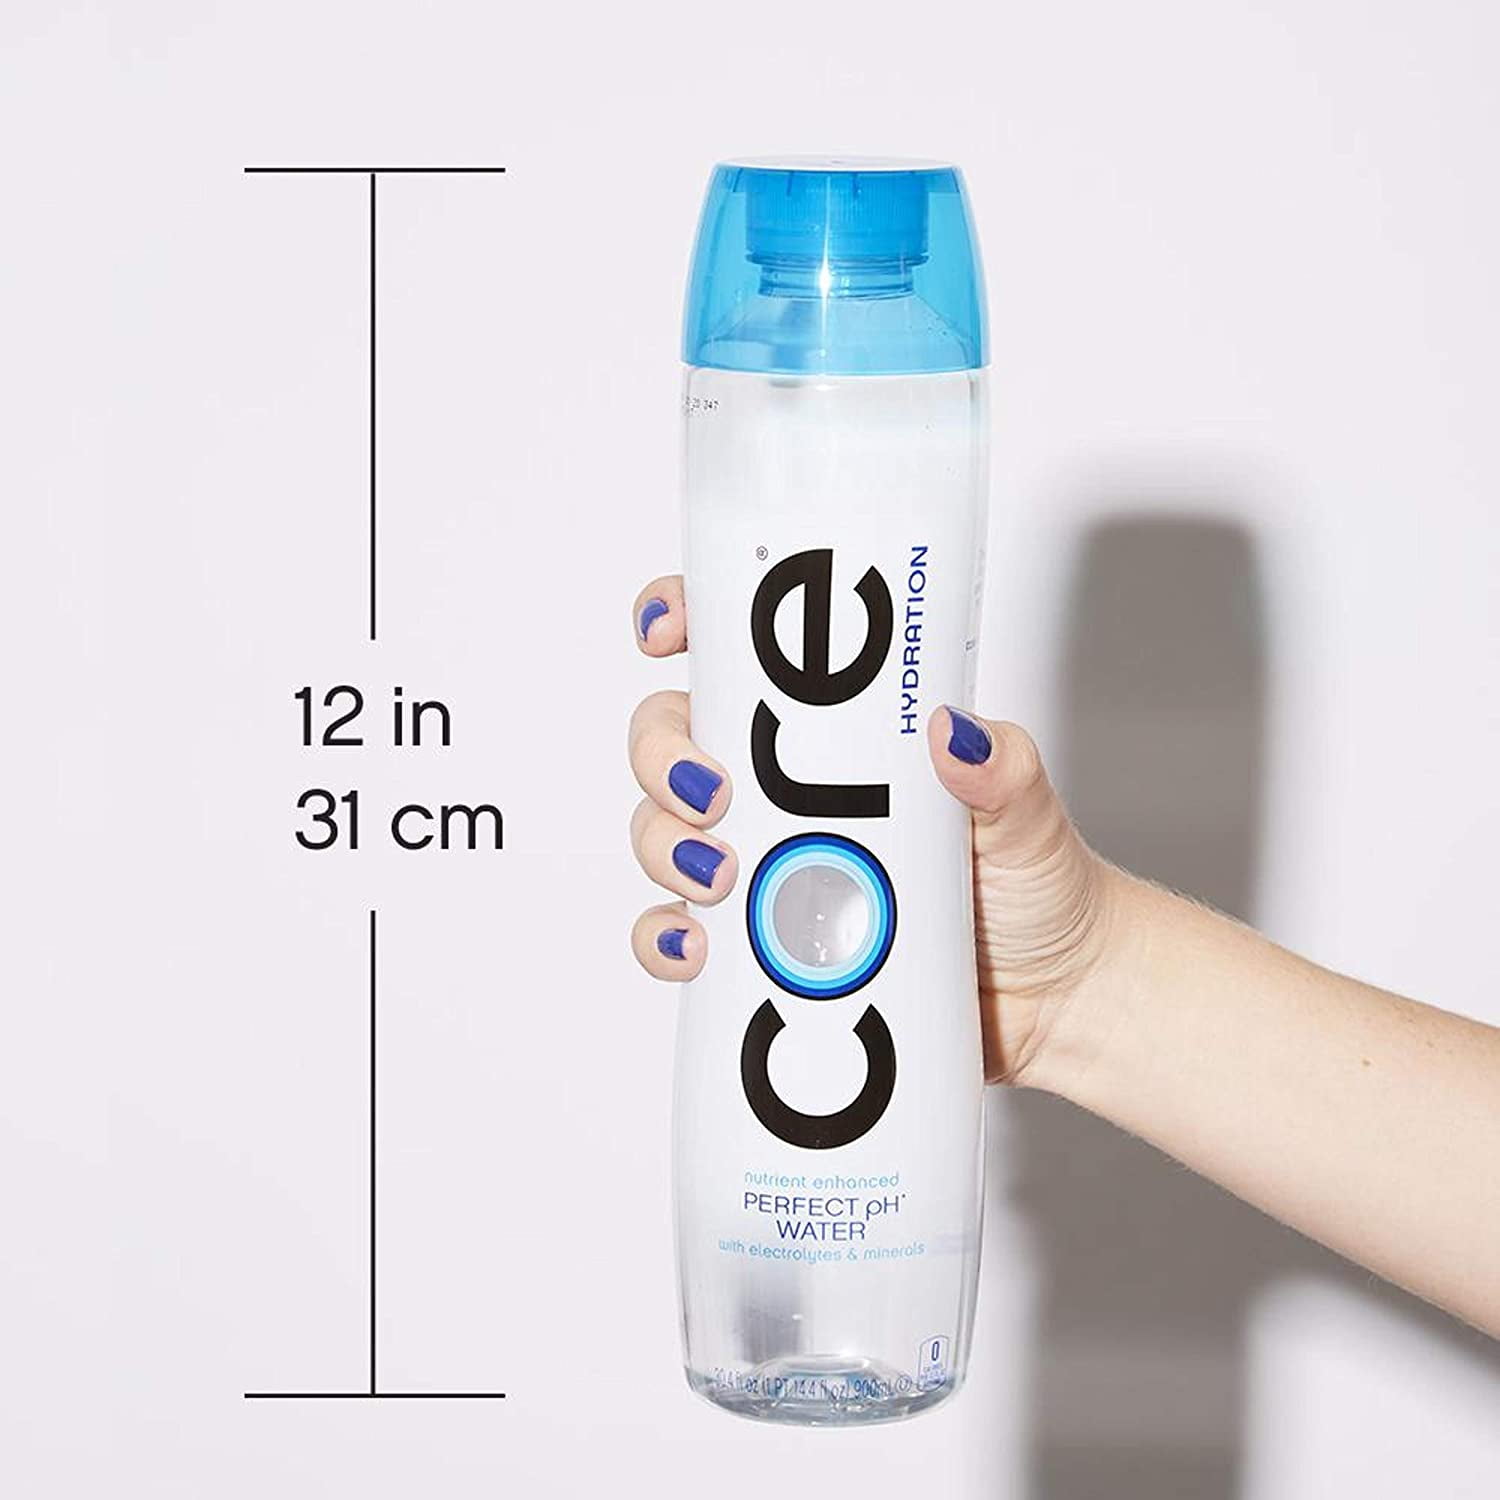 Core® Hydration Perfect pH Bottled Water, 30.4 fl oz - Mariano's